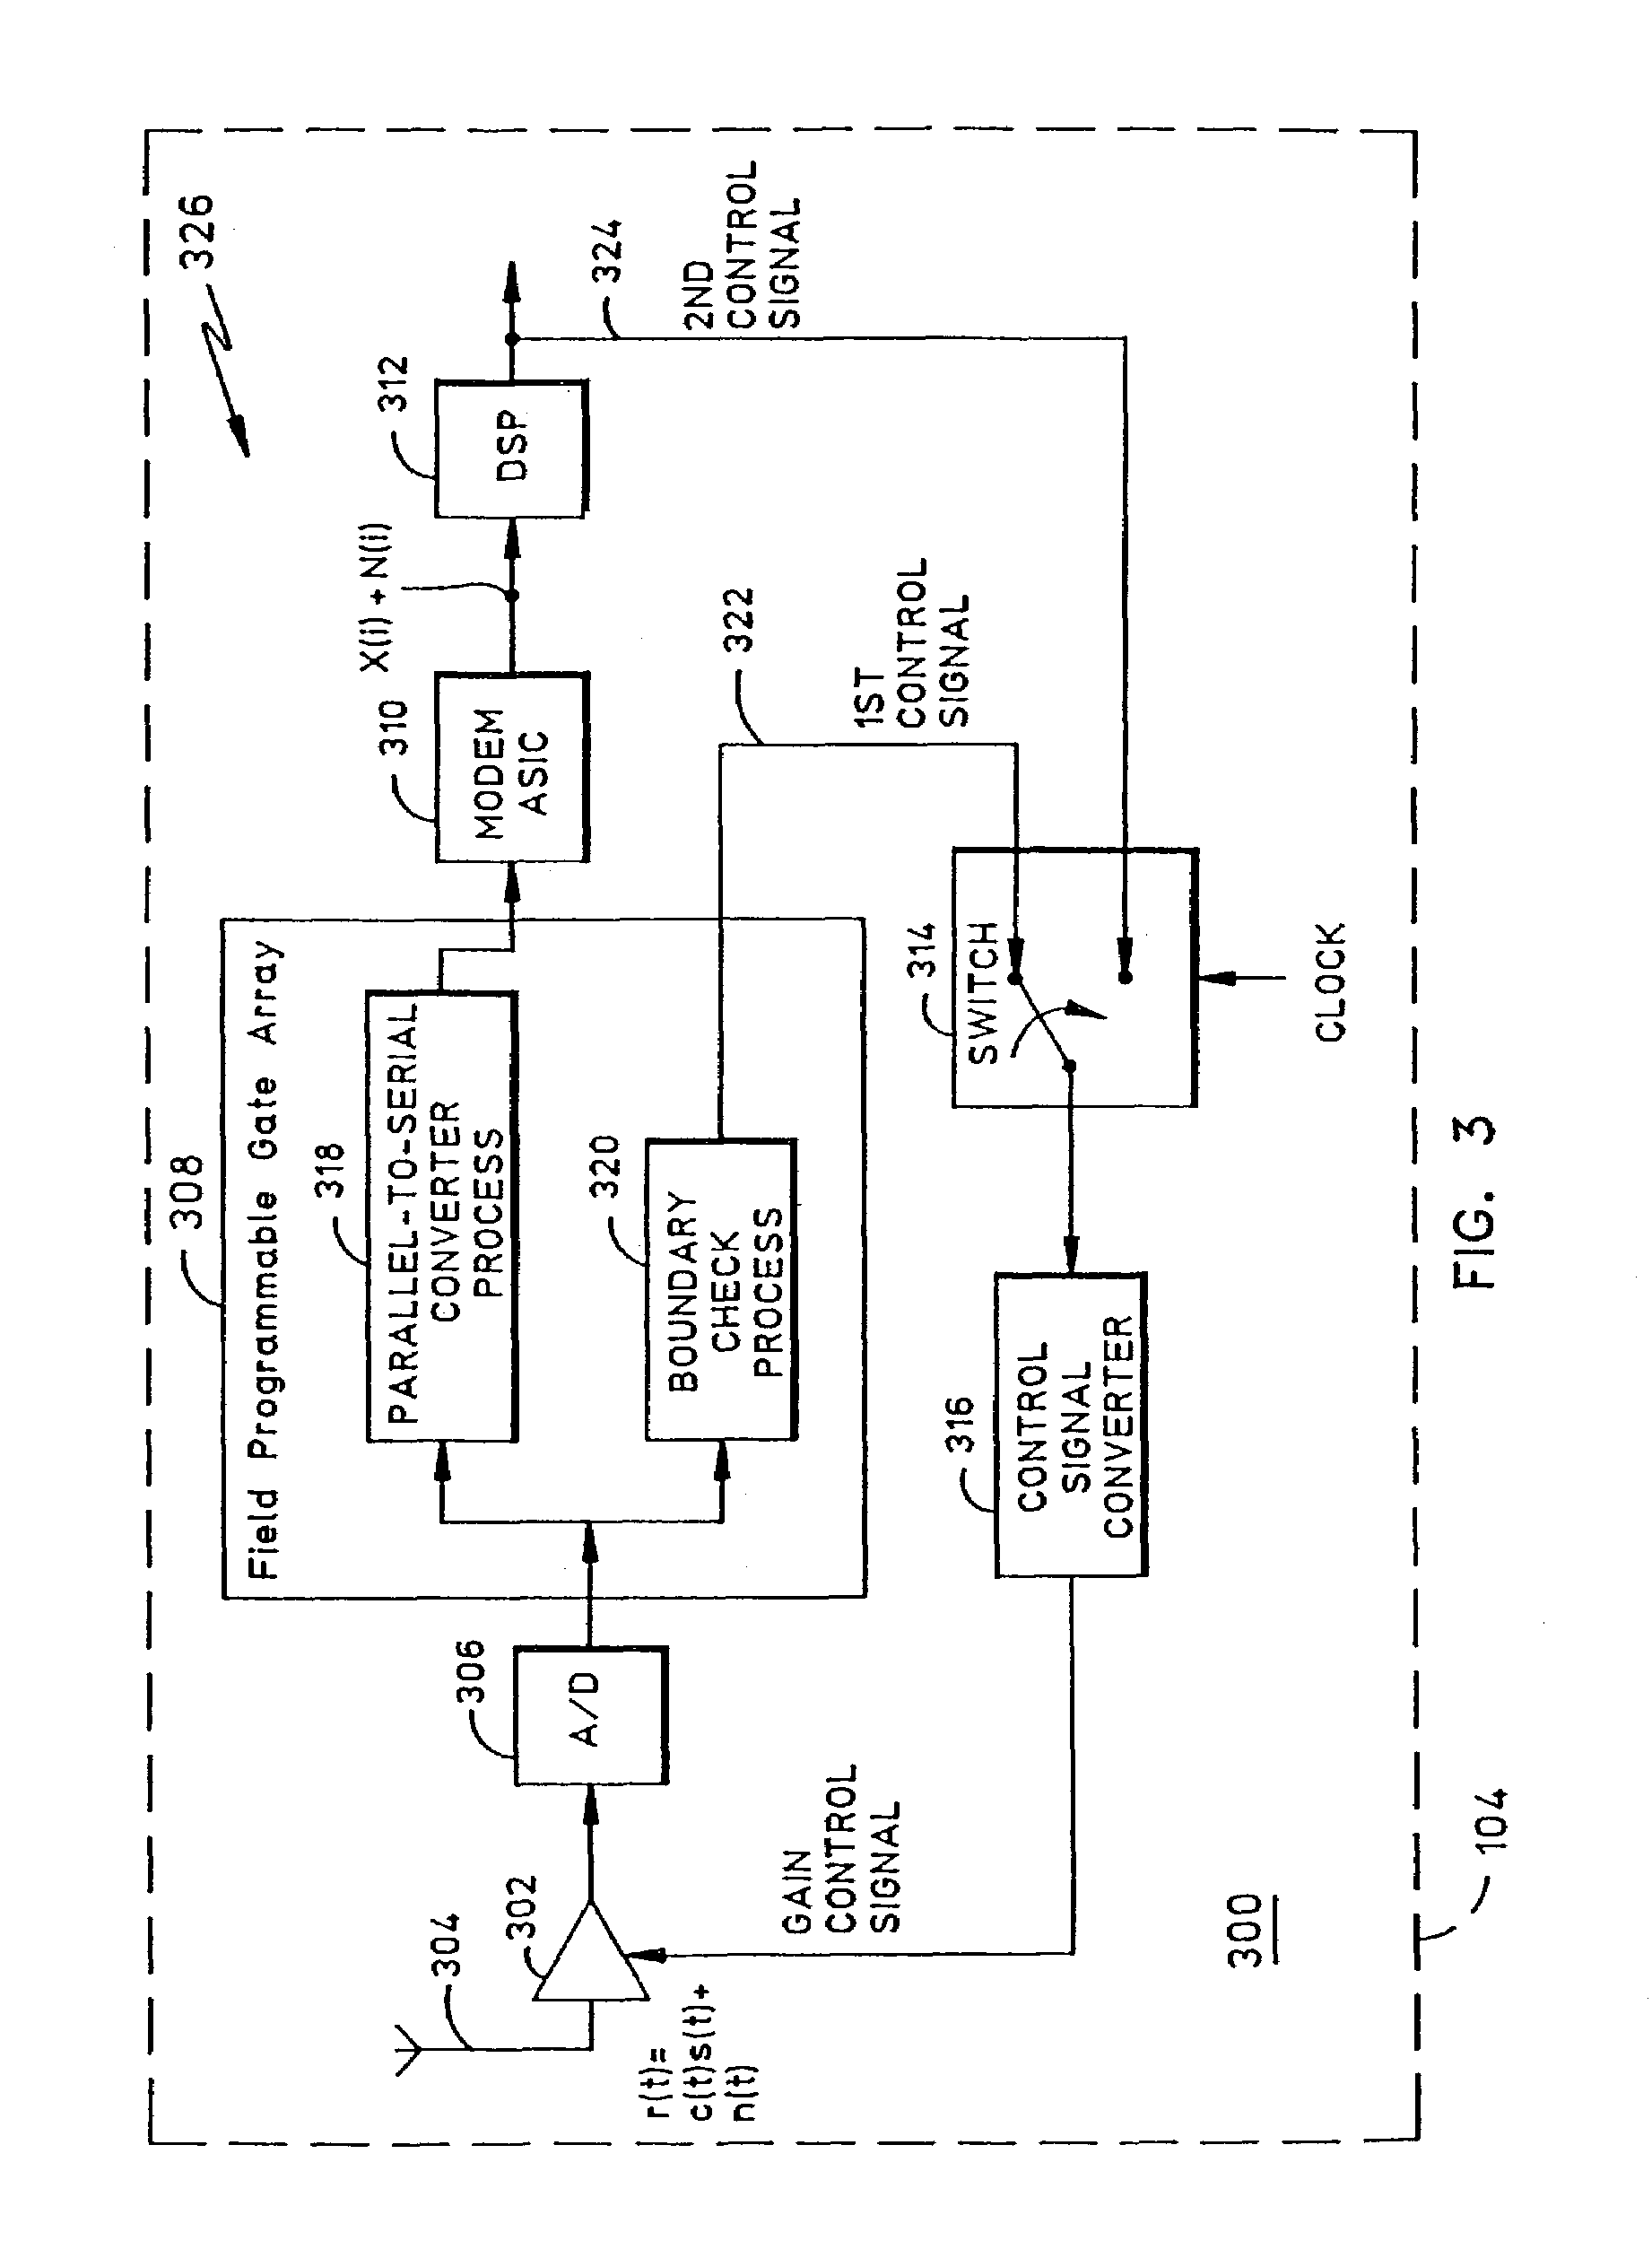 Automatic gain control methods and apparatus suitable for use in OFDM receivers